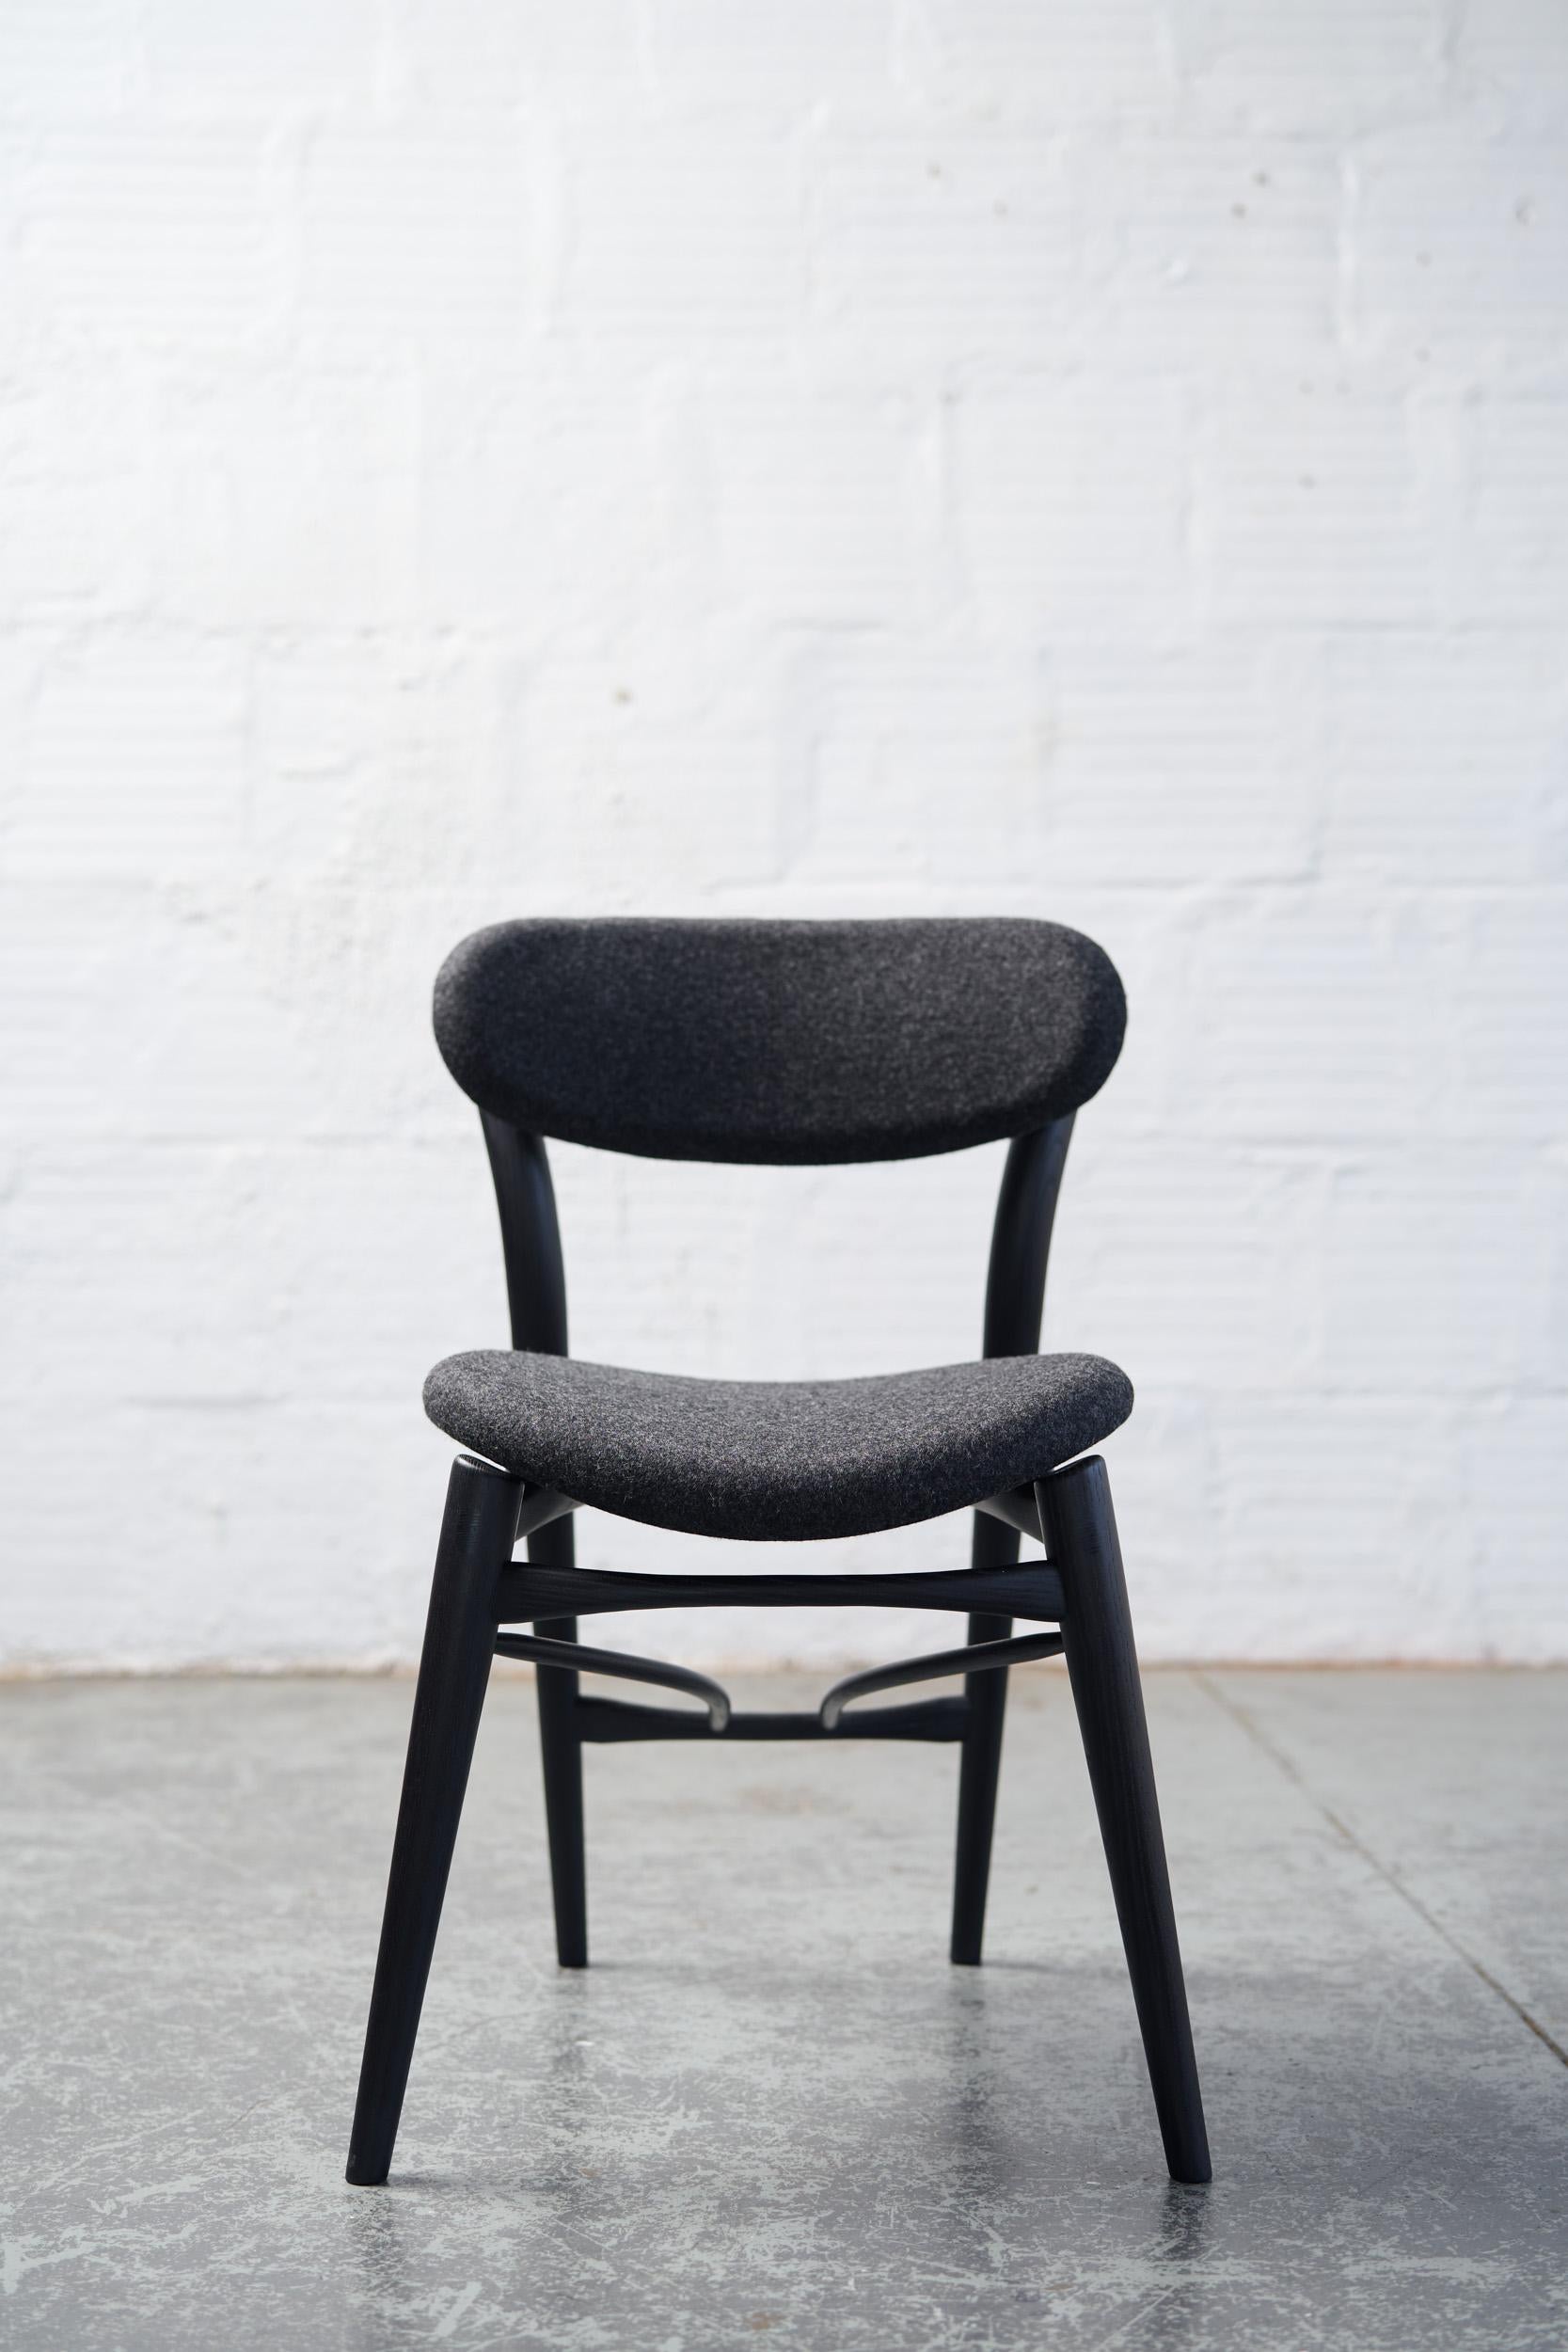 The Fjoon (pr. fyoon) collection rose out of a multi-year obsession with high end upholstery as well as an infatuation with wood joinery and principles of chair strength from the broader chair making community, especially windsor chair makers. My